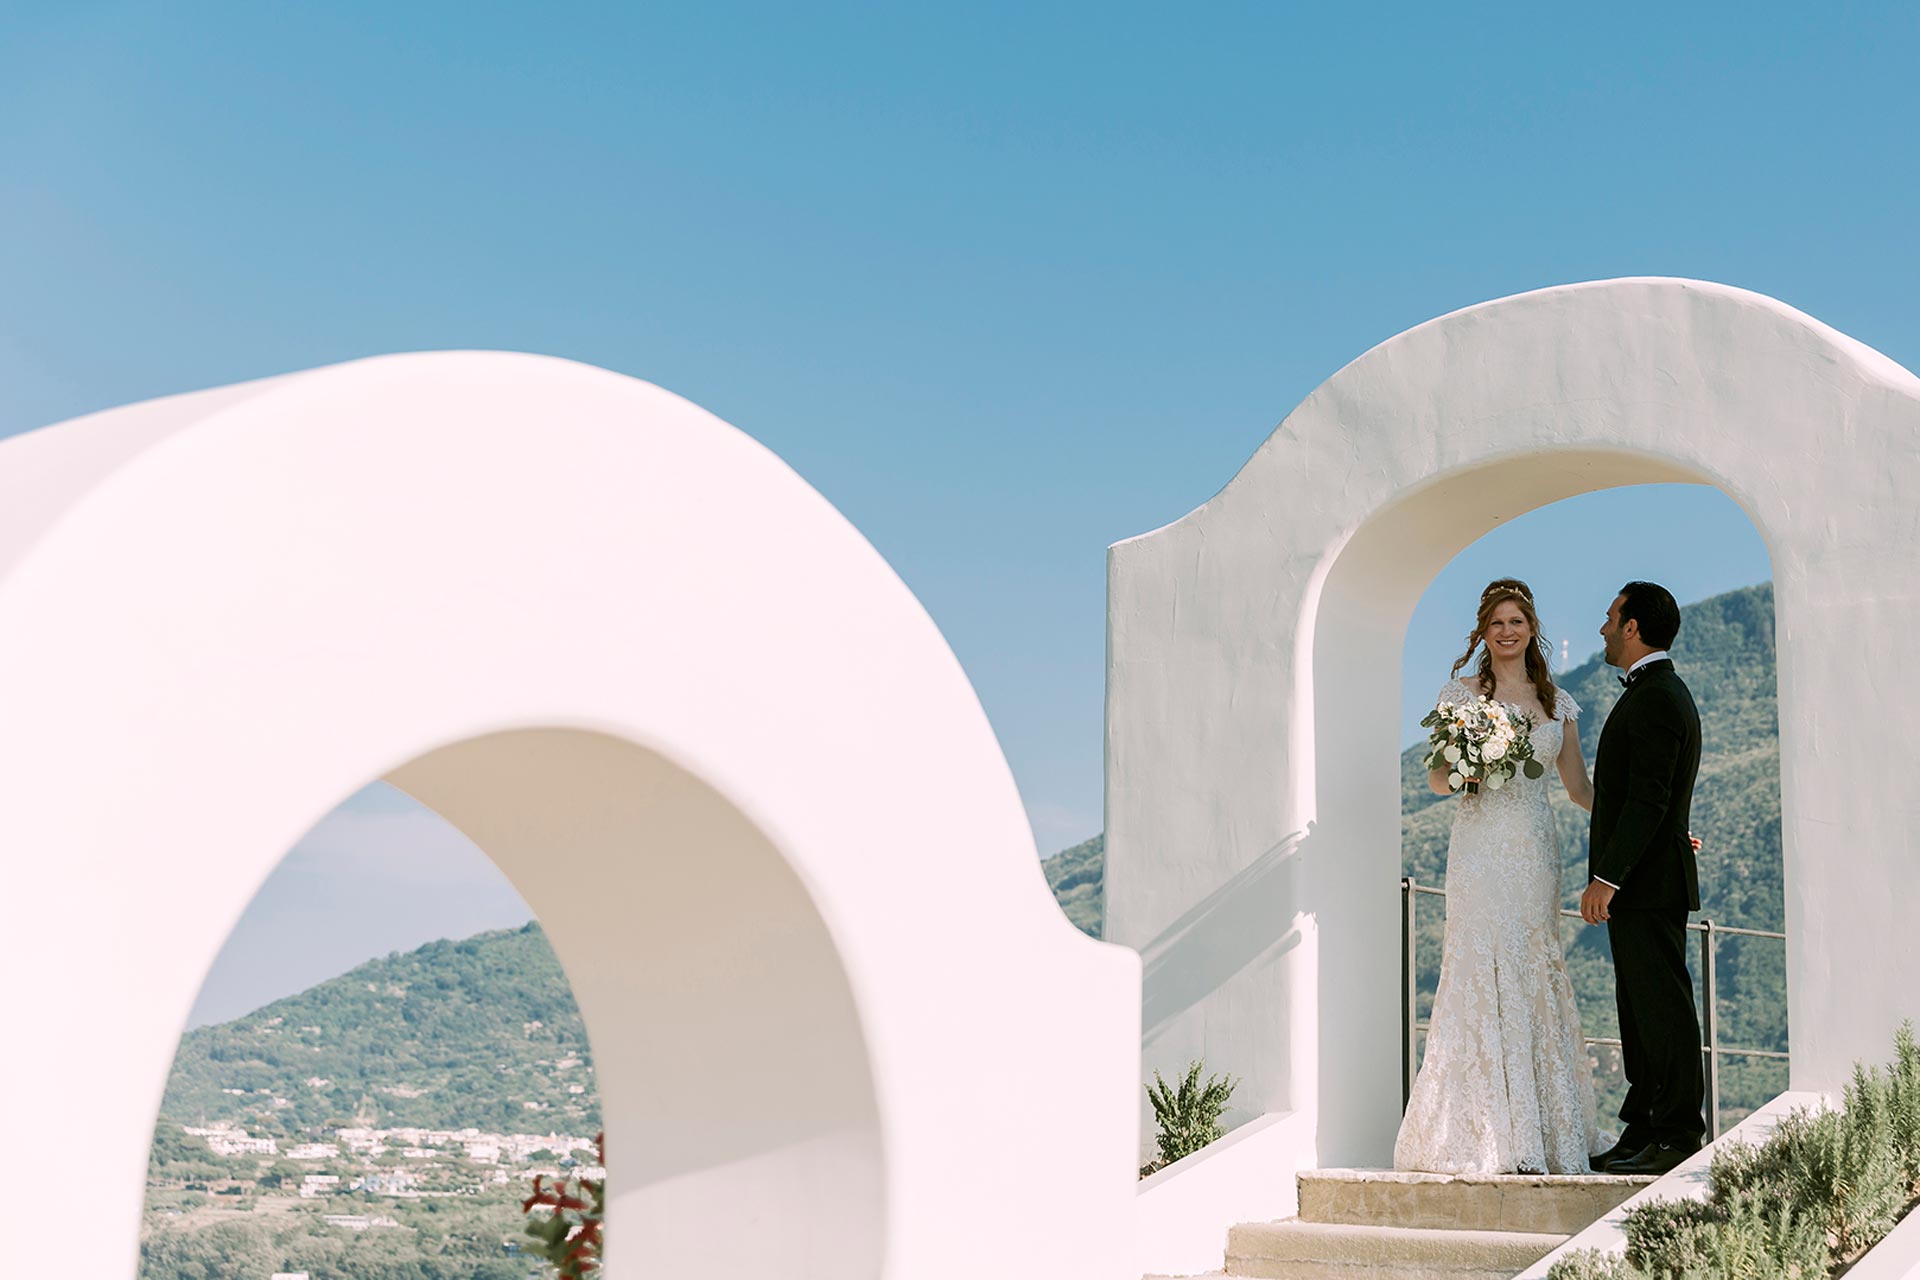 Wedding on the Island of Ischia: Discover the Reasons to Say “Yes”